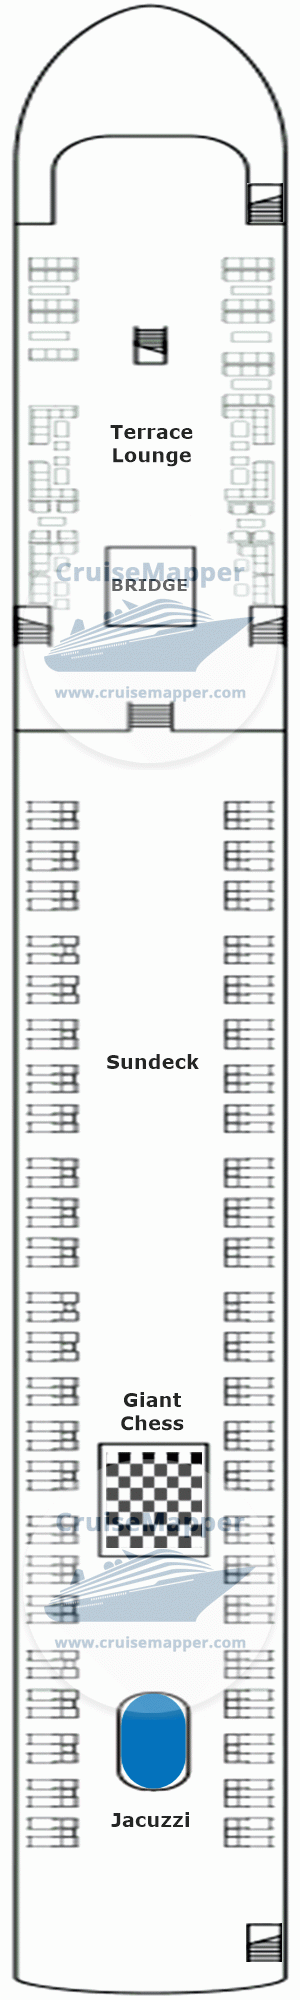 Spirit of the Moselle Deck 04 - Sundeck-Pool